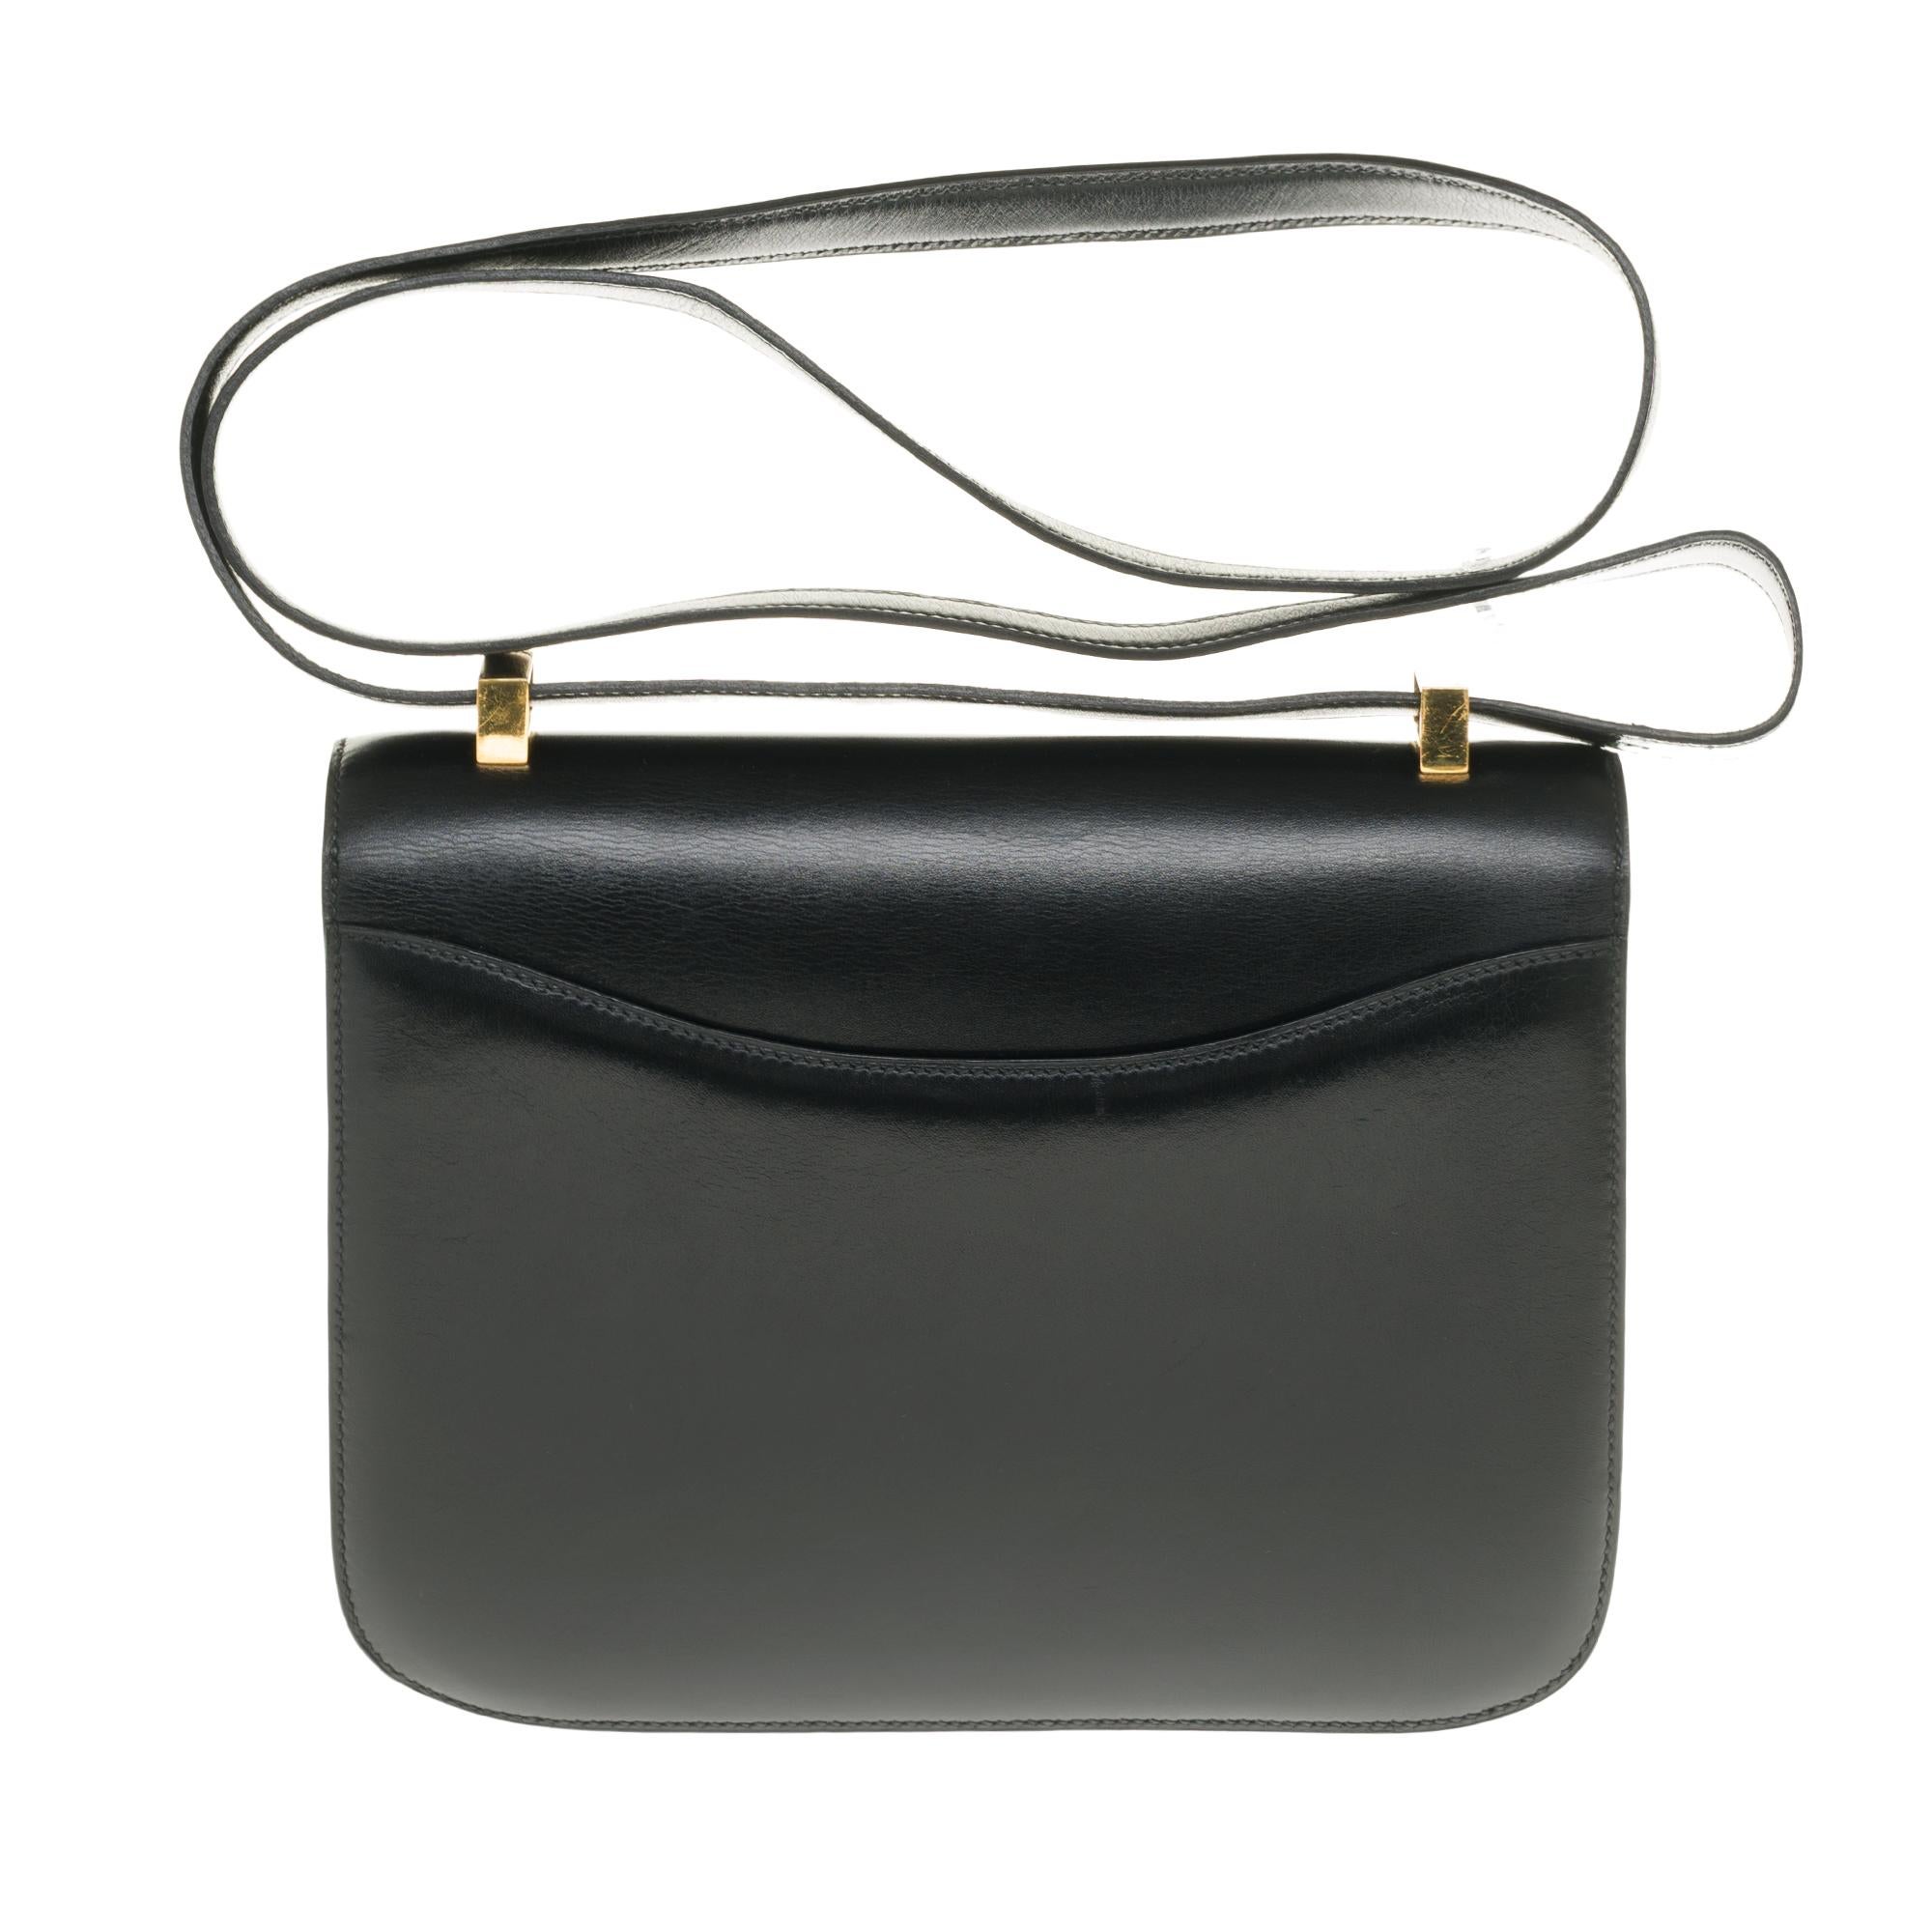 Stunning Hermes Constance Handbag 23 cm in black box leather, gold metal trim, black leather transformable handle allowing a hand or shoulder support.

Closure marked H on flap.
A patch pocket on the back of the bag.
Lining in black leather, a